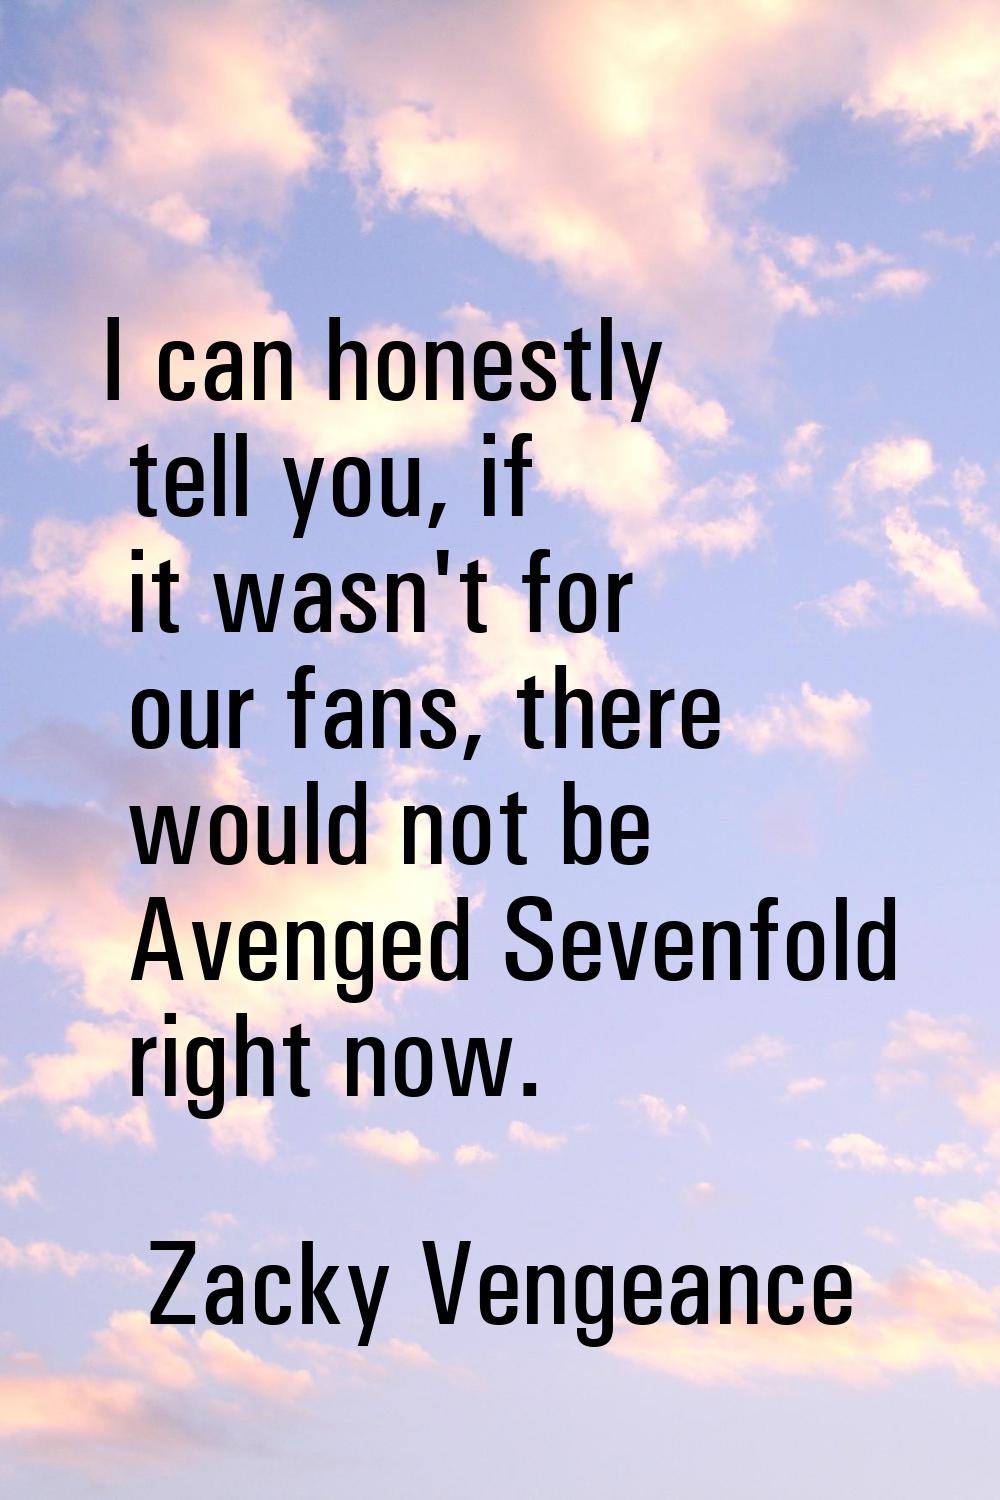 I can honestly tell you, if it wasn't for our fans, there would not be Avenged Sevenfold right now.